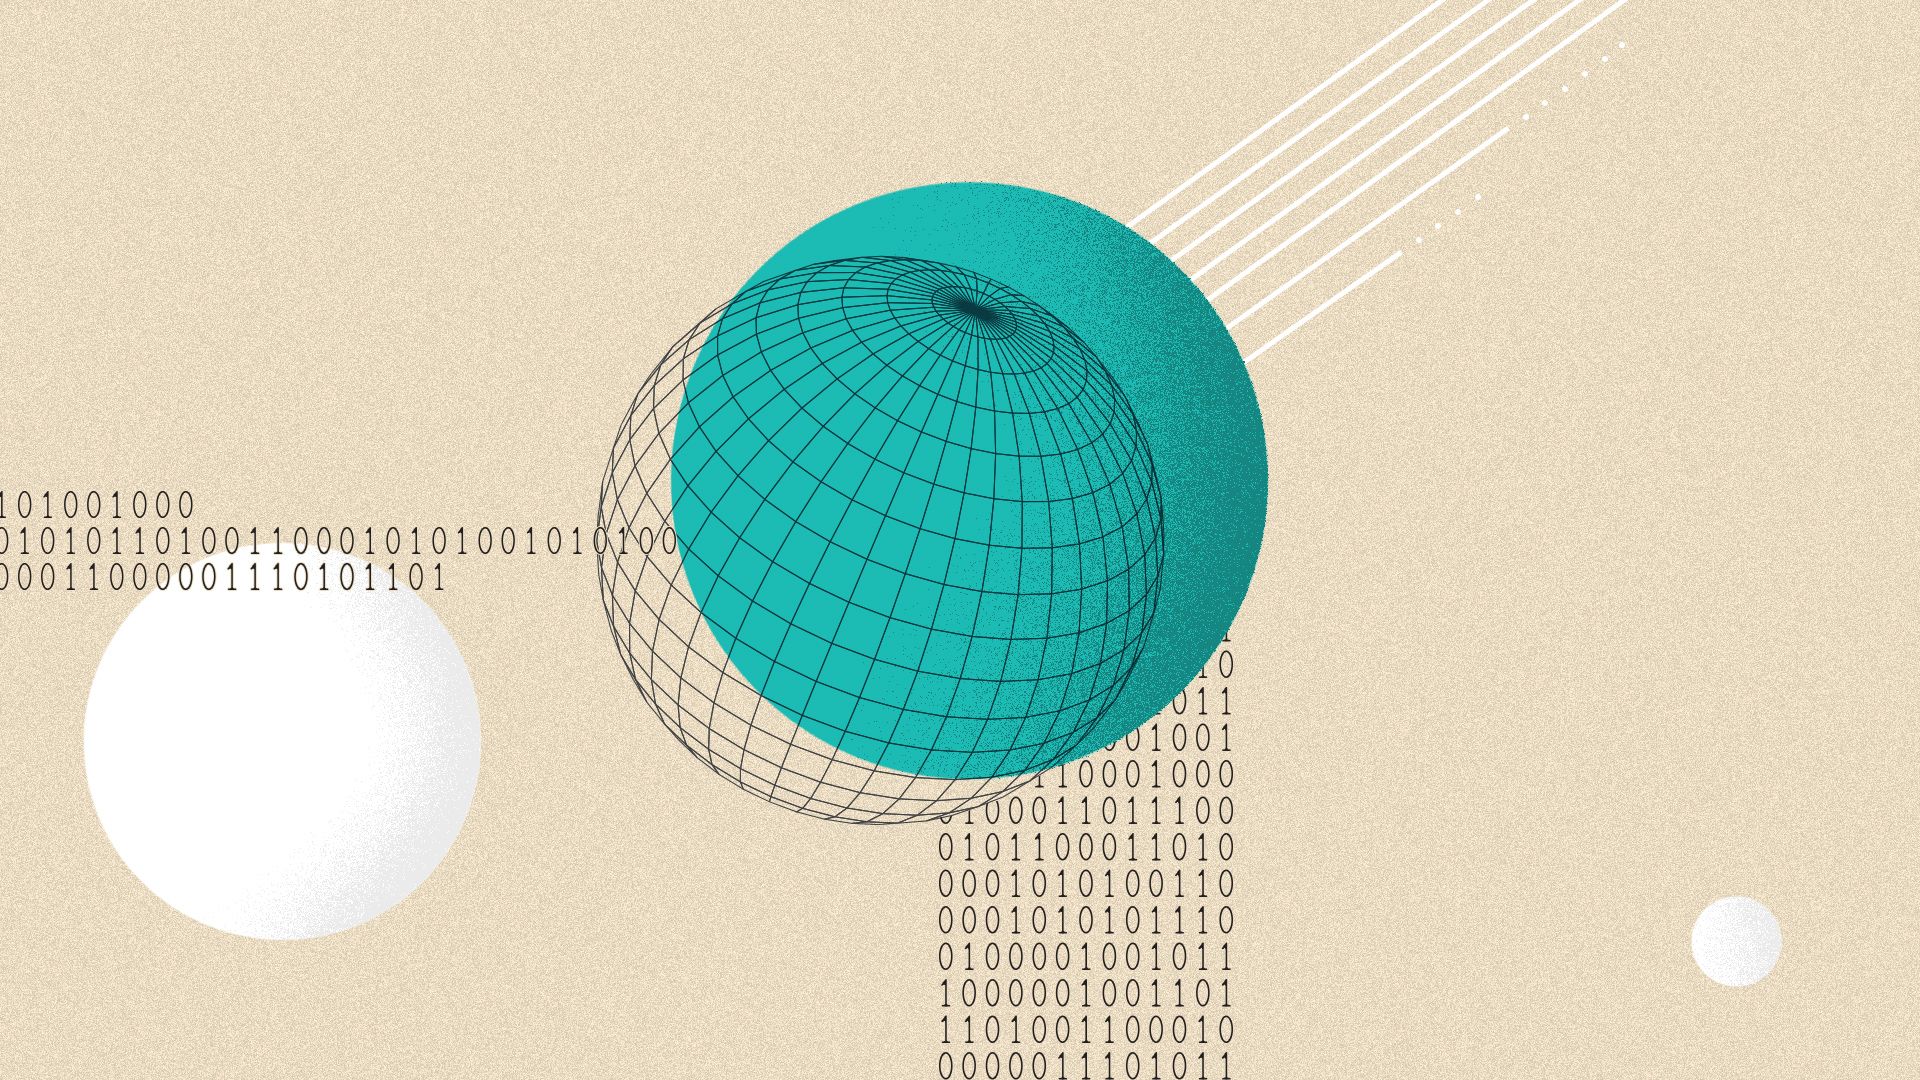 Illustrated collage of circular shapes, spheres and binary code.